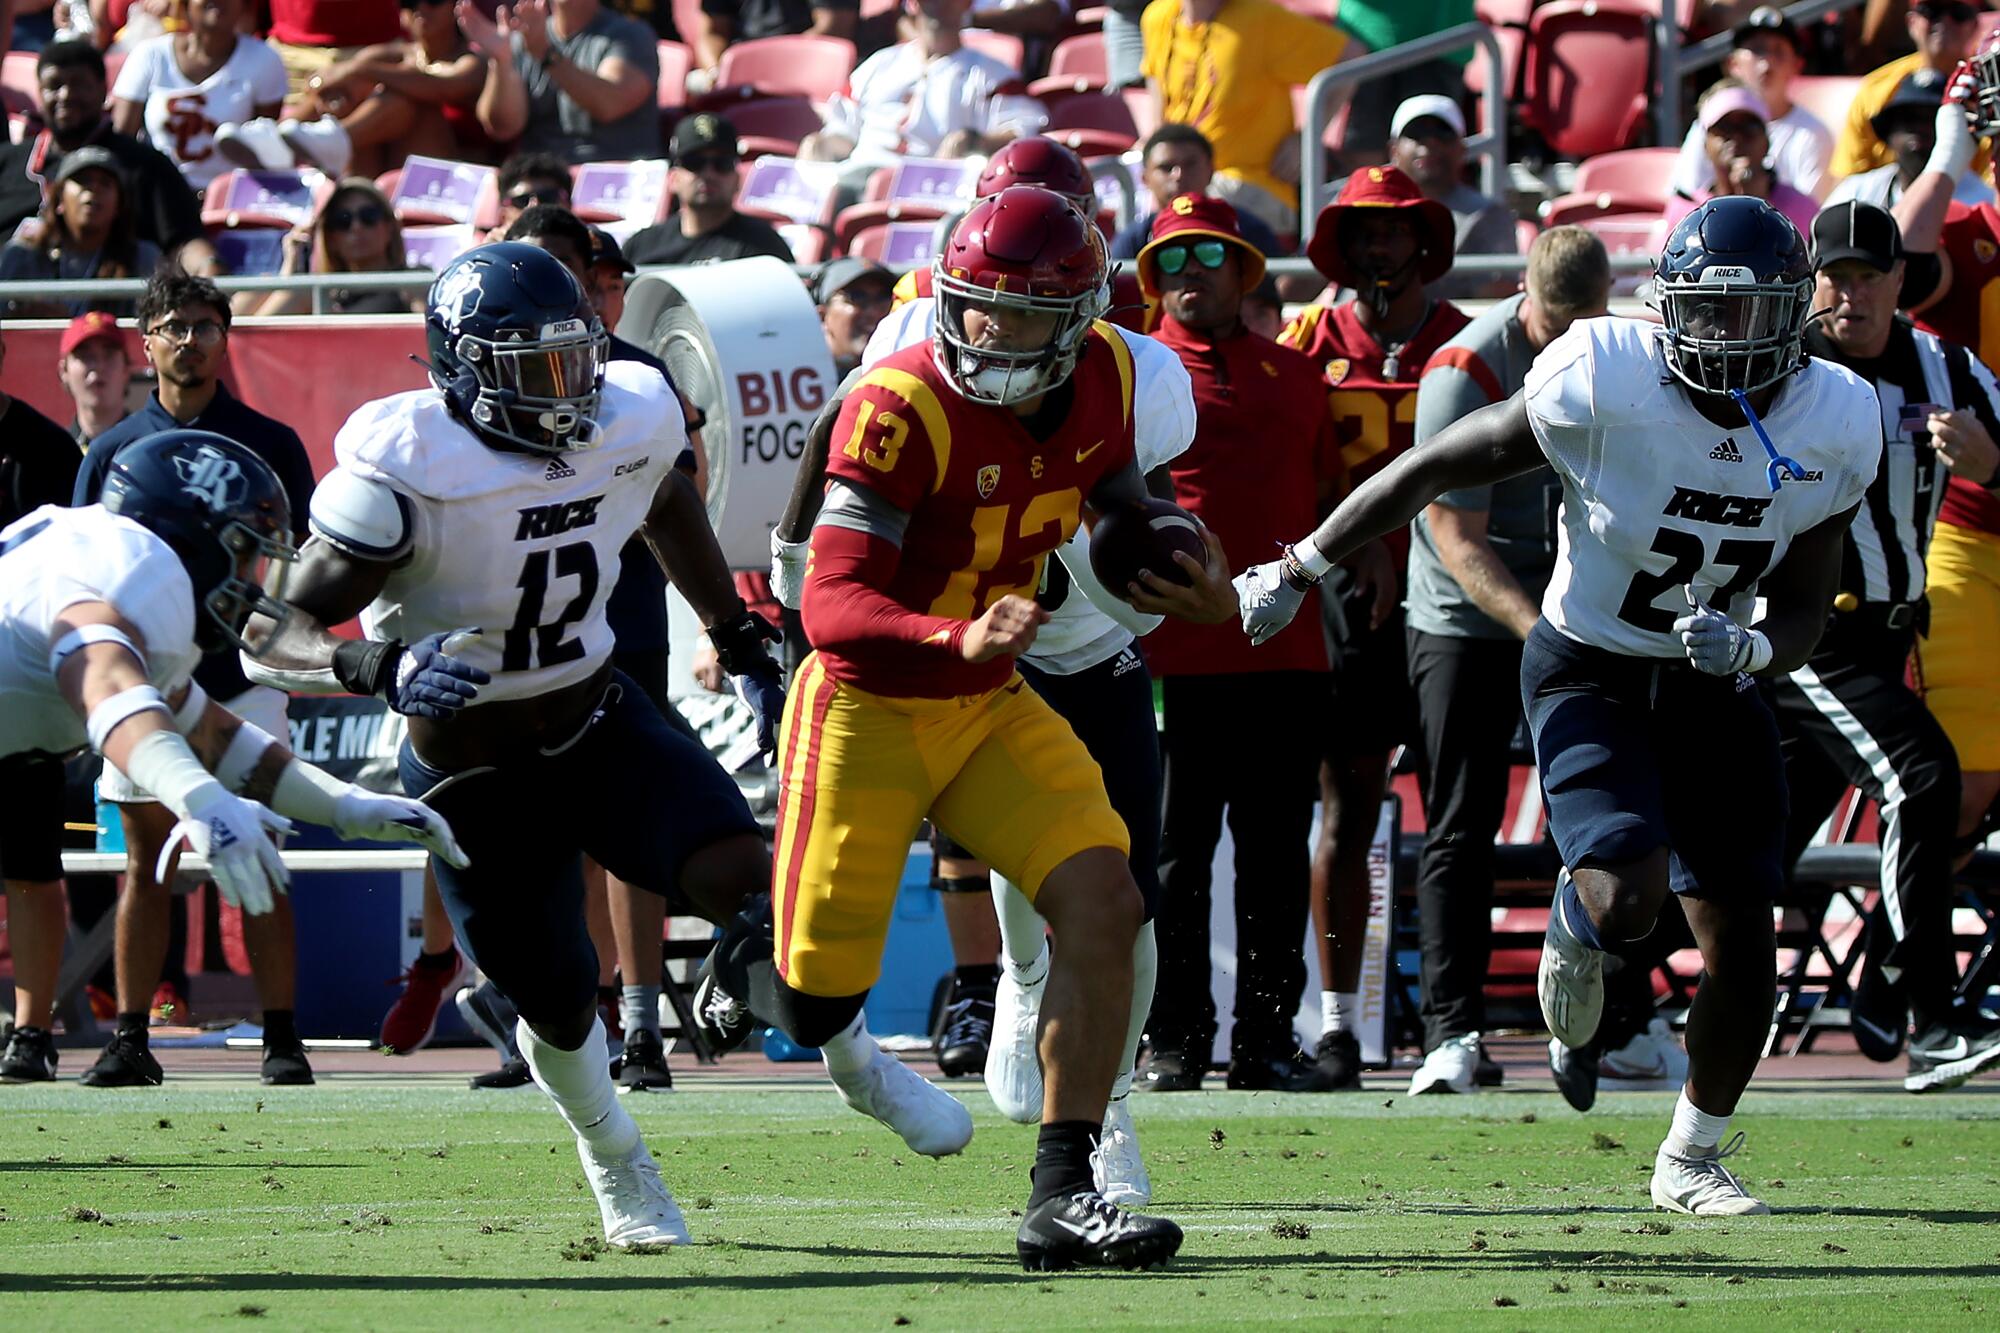 USC quarterback Caleb Williams carries the ball against Rice in the second quarter Saturday at the Coliseum.